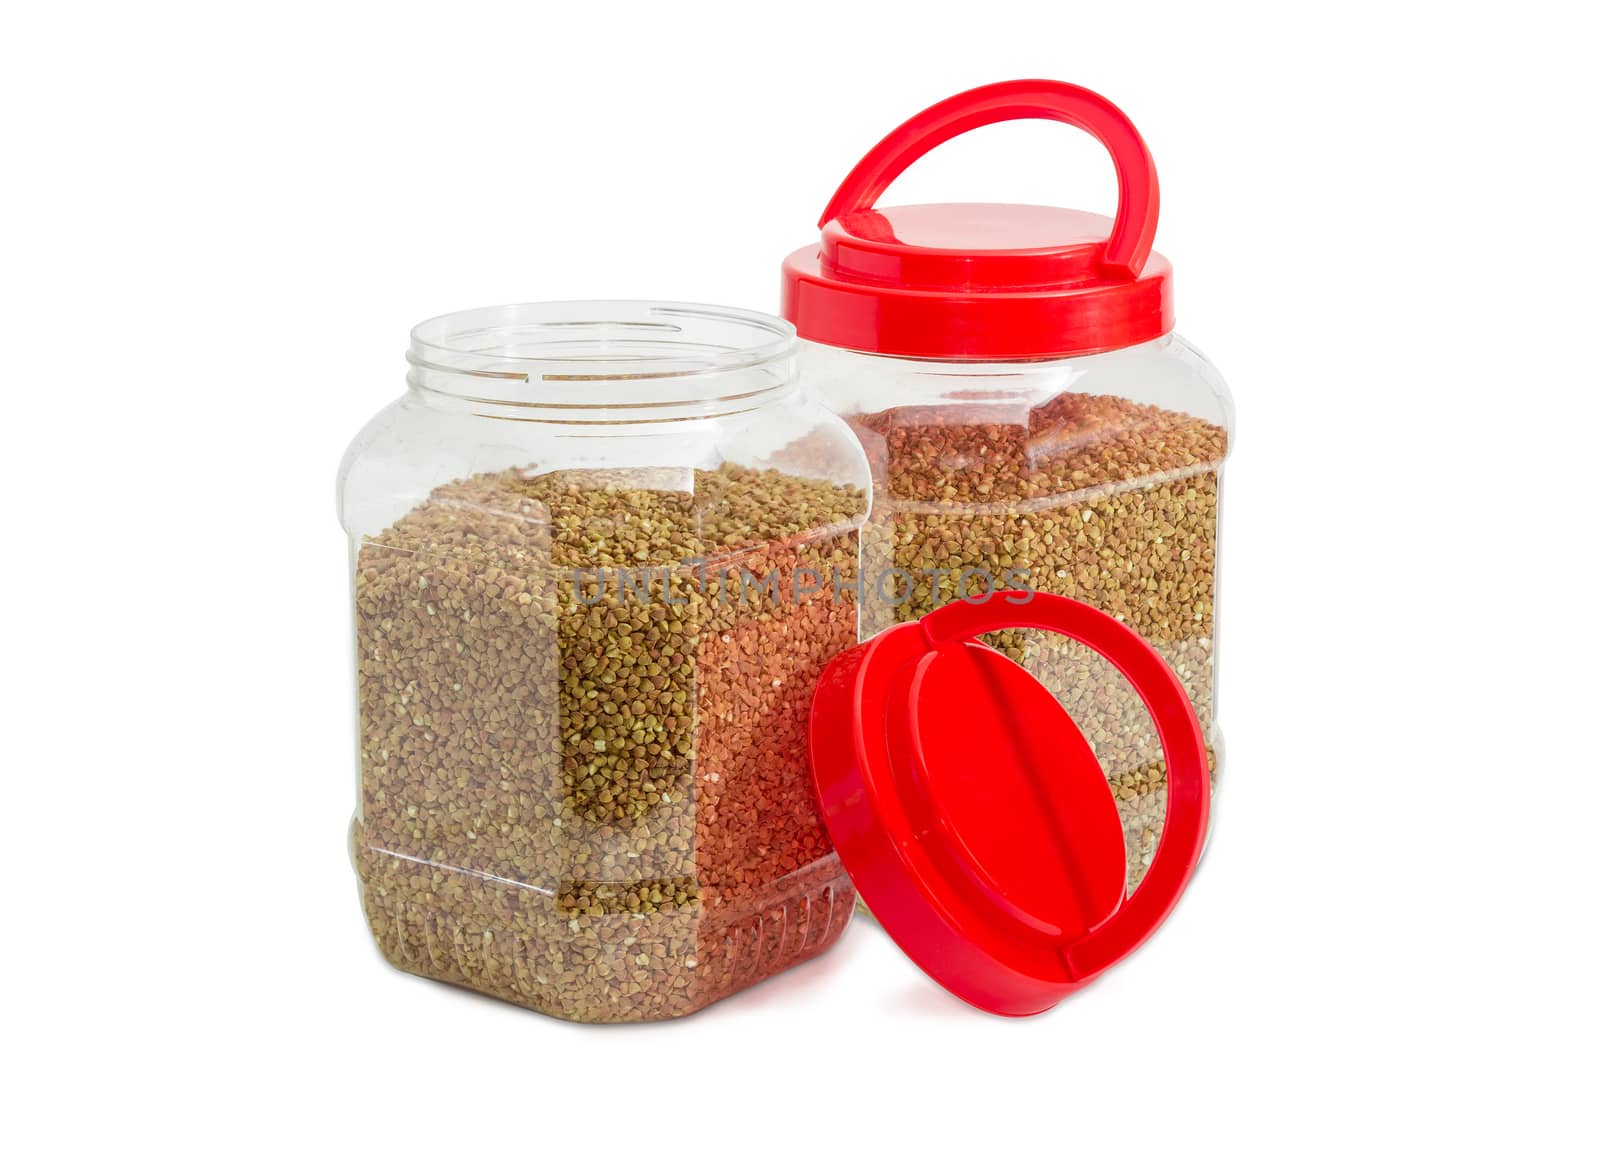 Buckwheat groats peeled from the husk in two transparent plastic containers with the red covers, one of them open on a light background
